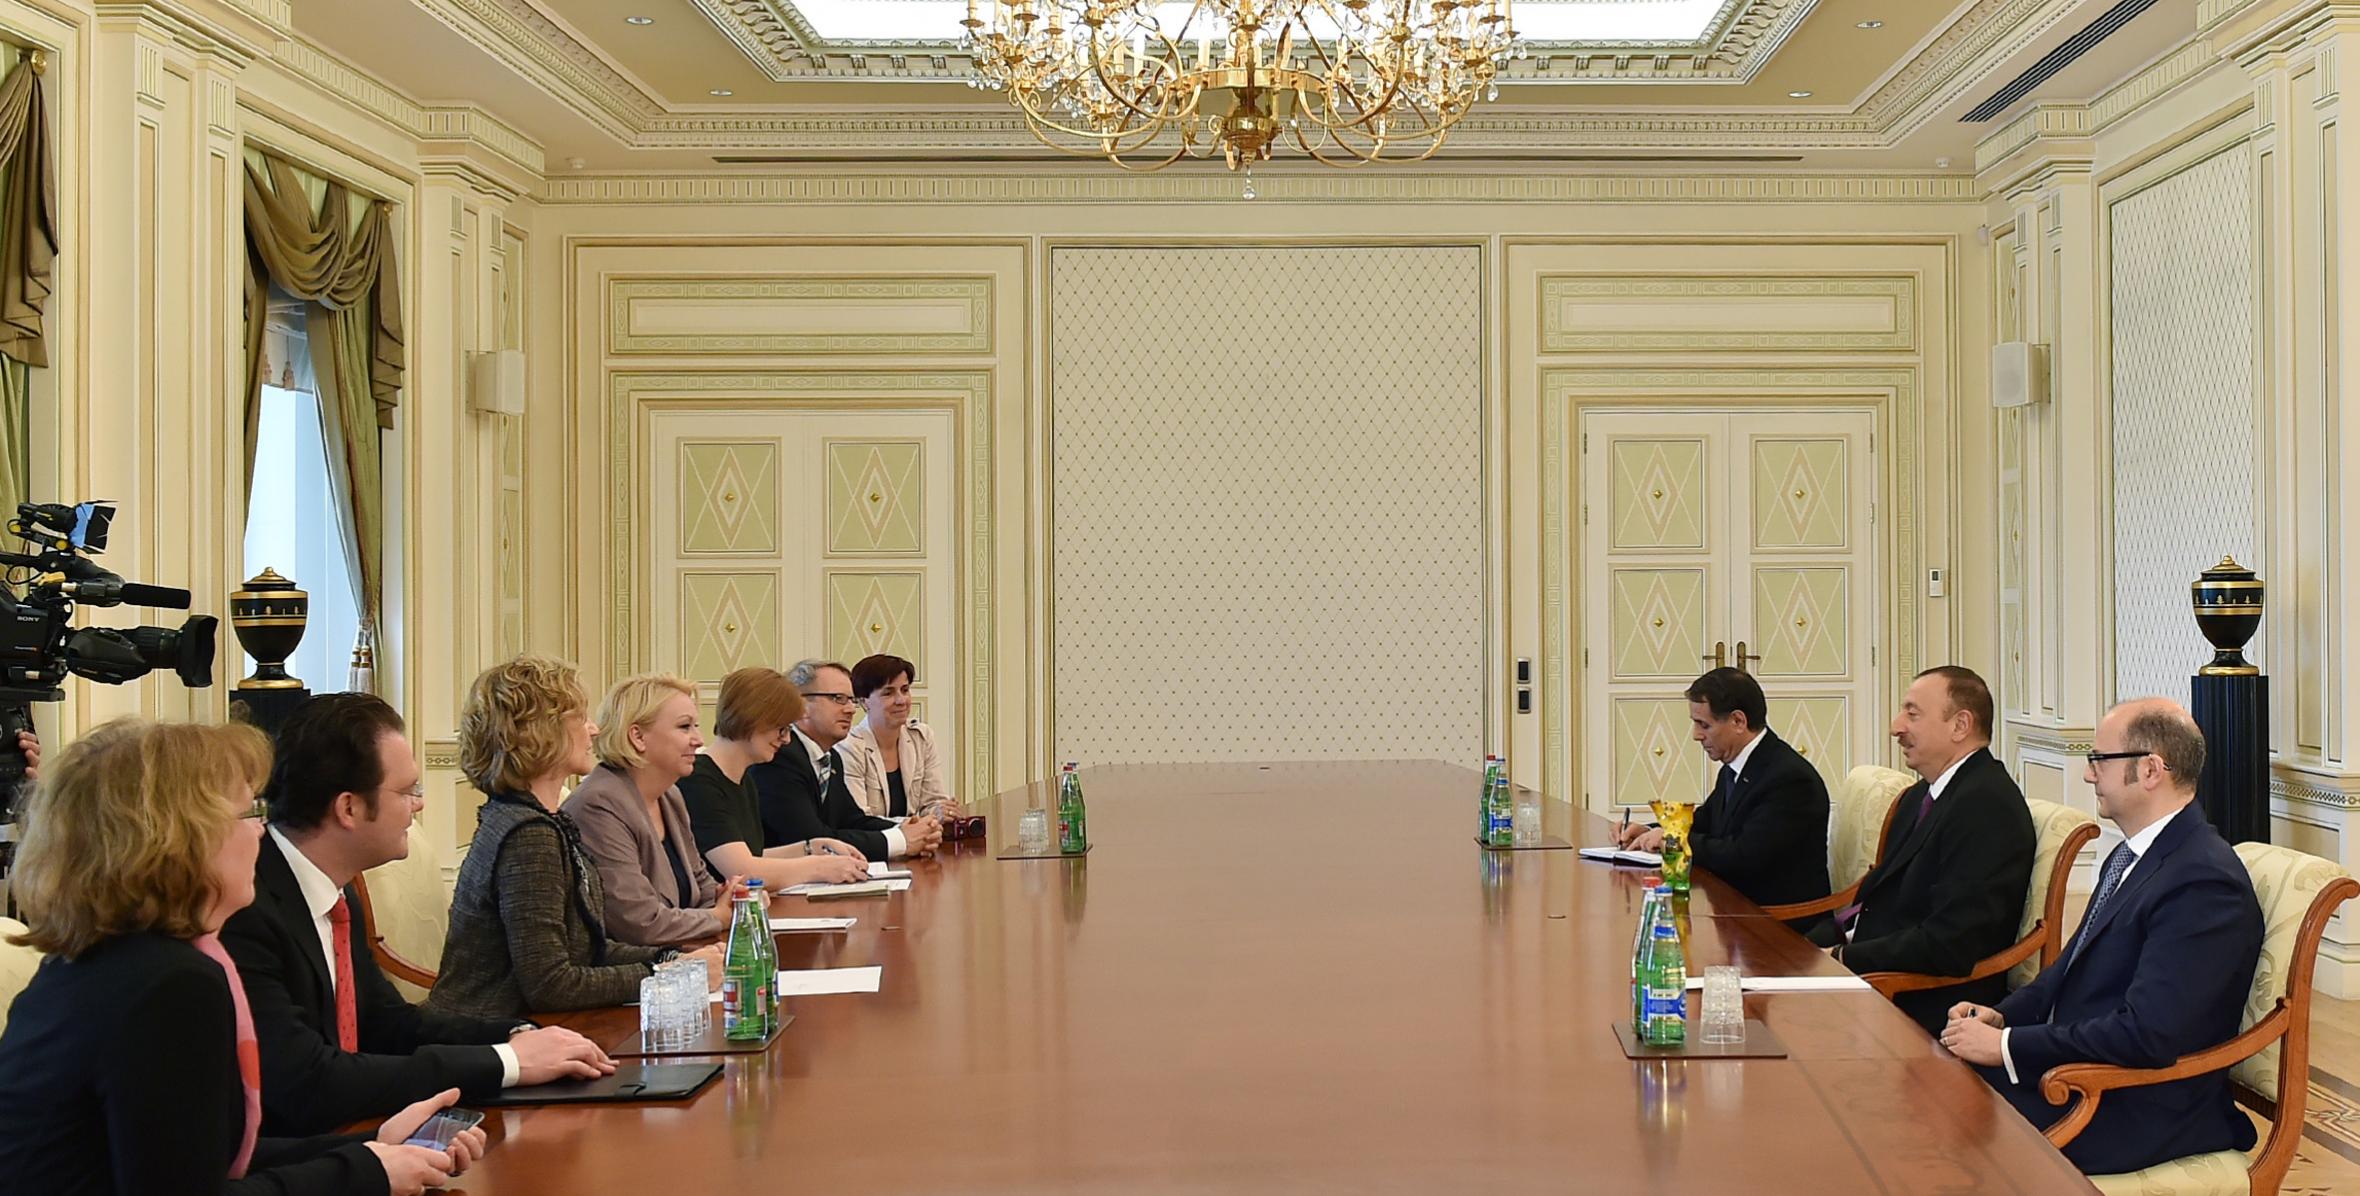 Ilham Aliyev received a delegation led by the chair of the Germany–South Caucasus Parliamentary Friendship Group at Bundestag